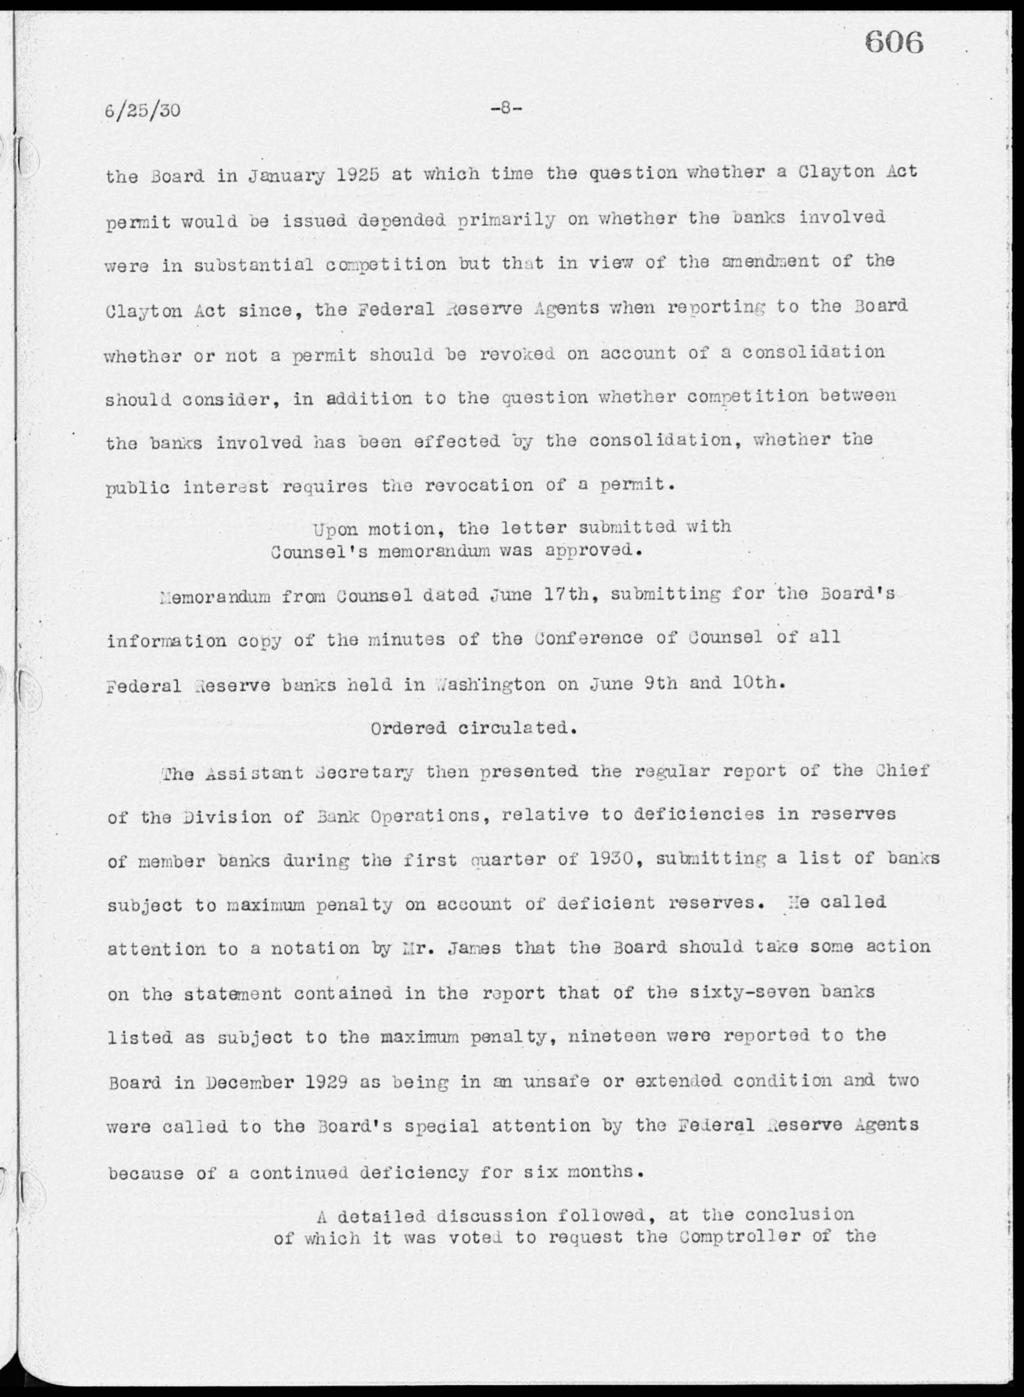 606 6/25/30-8- the 3oard in Oanuary 1925 at which time the question whether a Clayton Act permit would oe issued depended primarily on whether the oanks involved were in substantial co7.